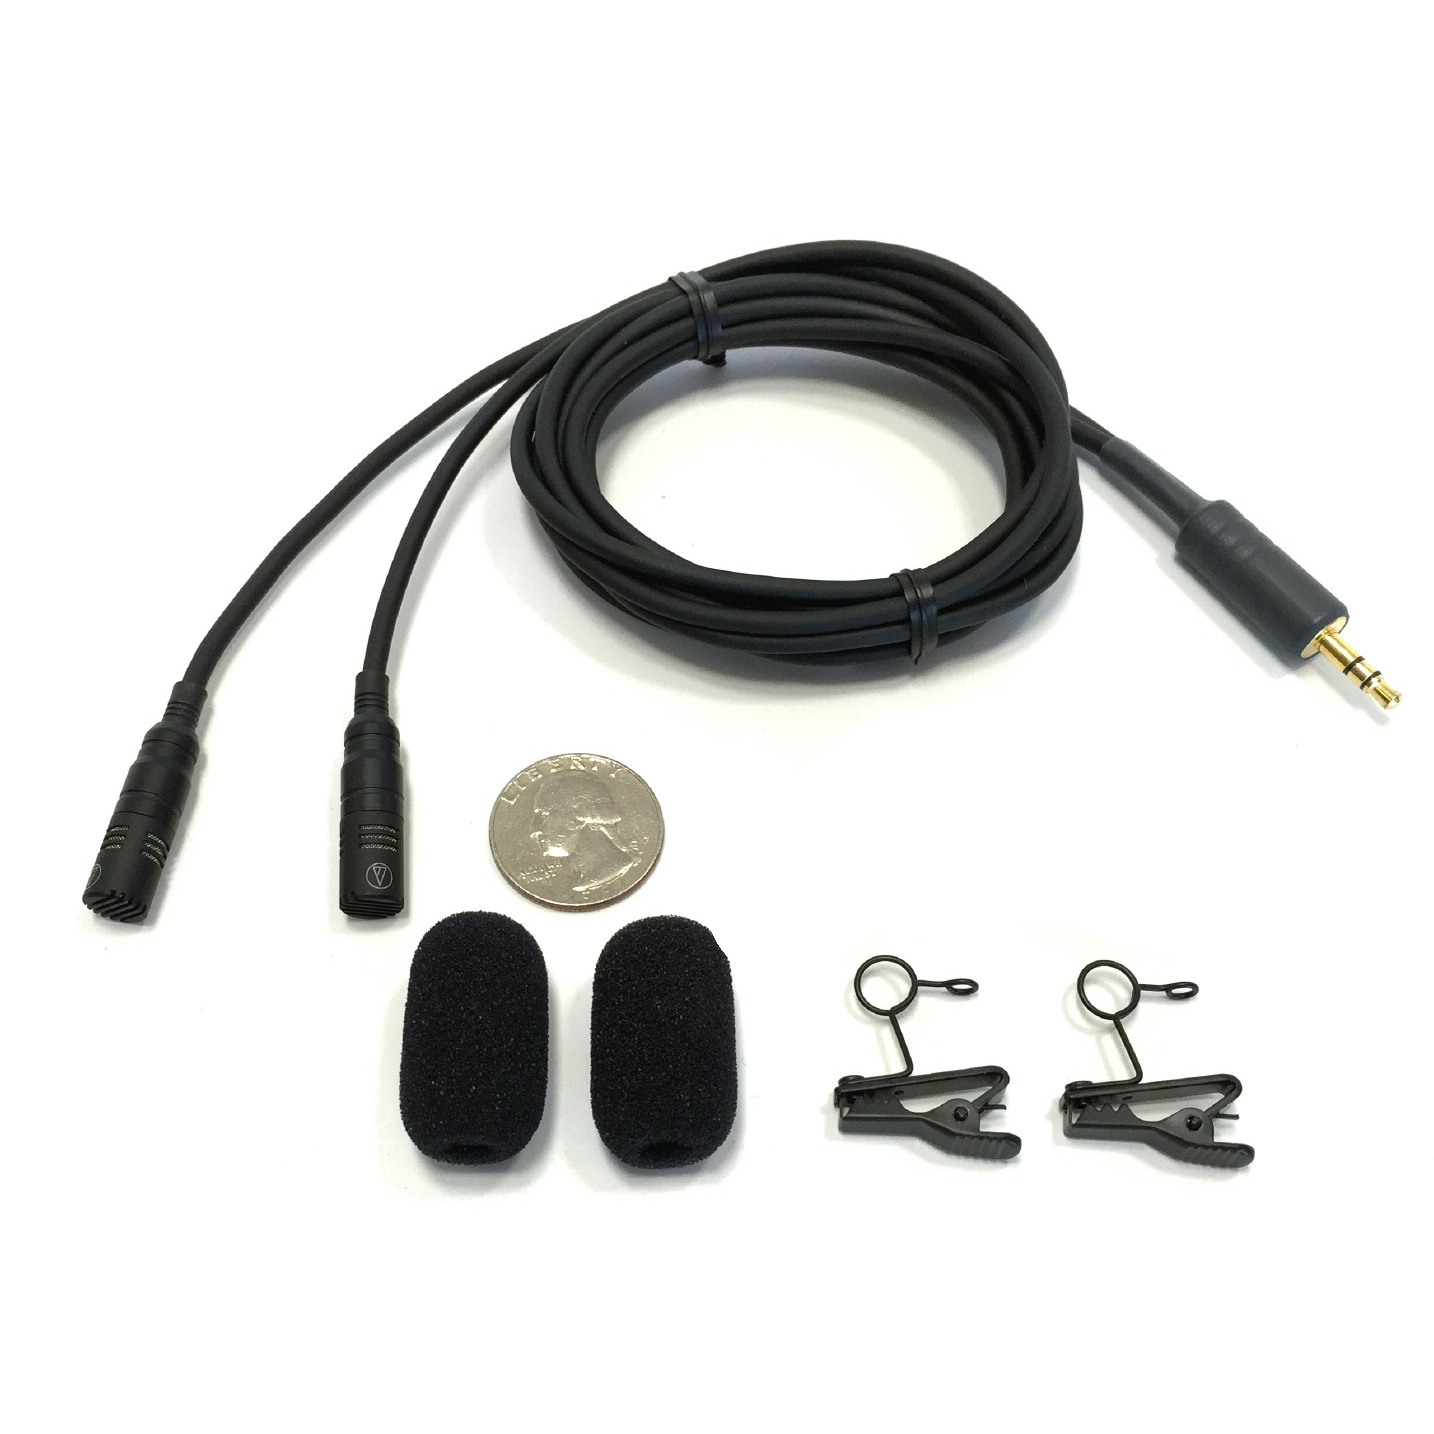 SP-CMC-8 - Miniature Cardioid stereo microphones w/ clips and windscreens